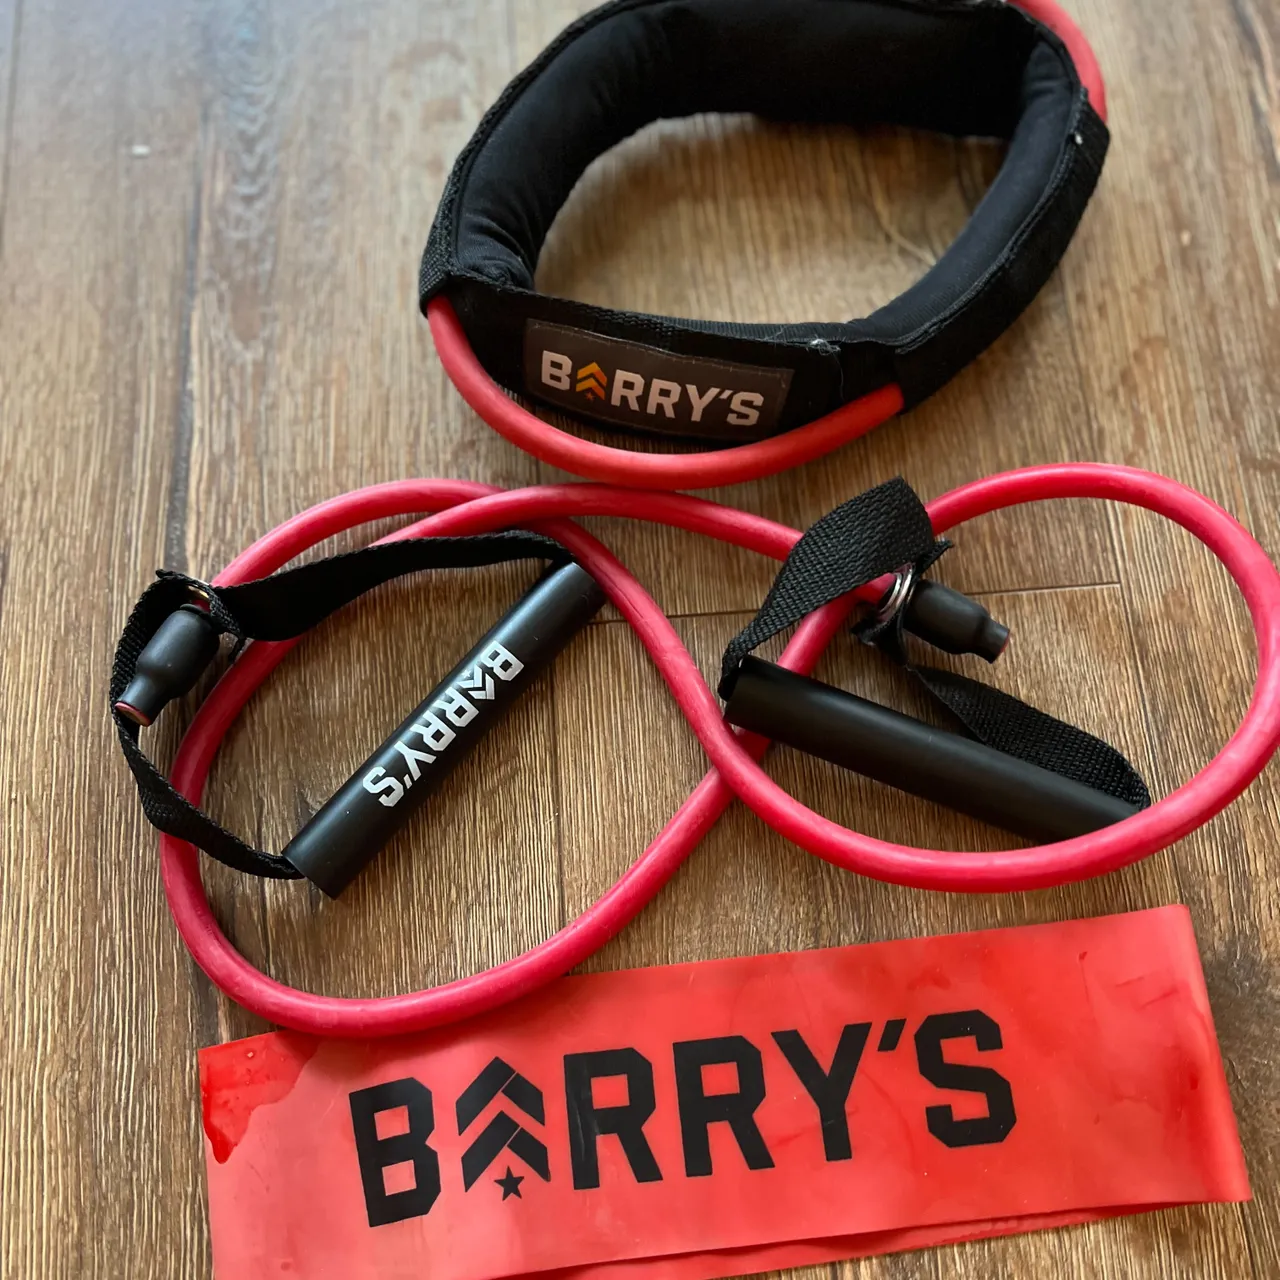 Barry’s home workout kit photo 1